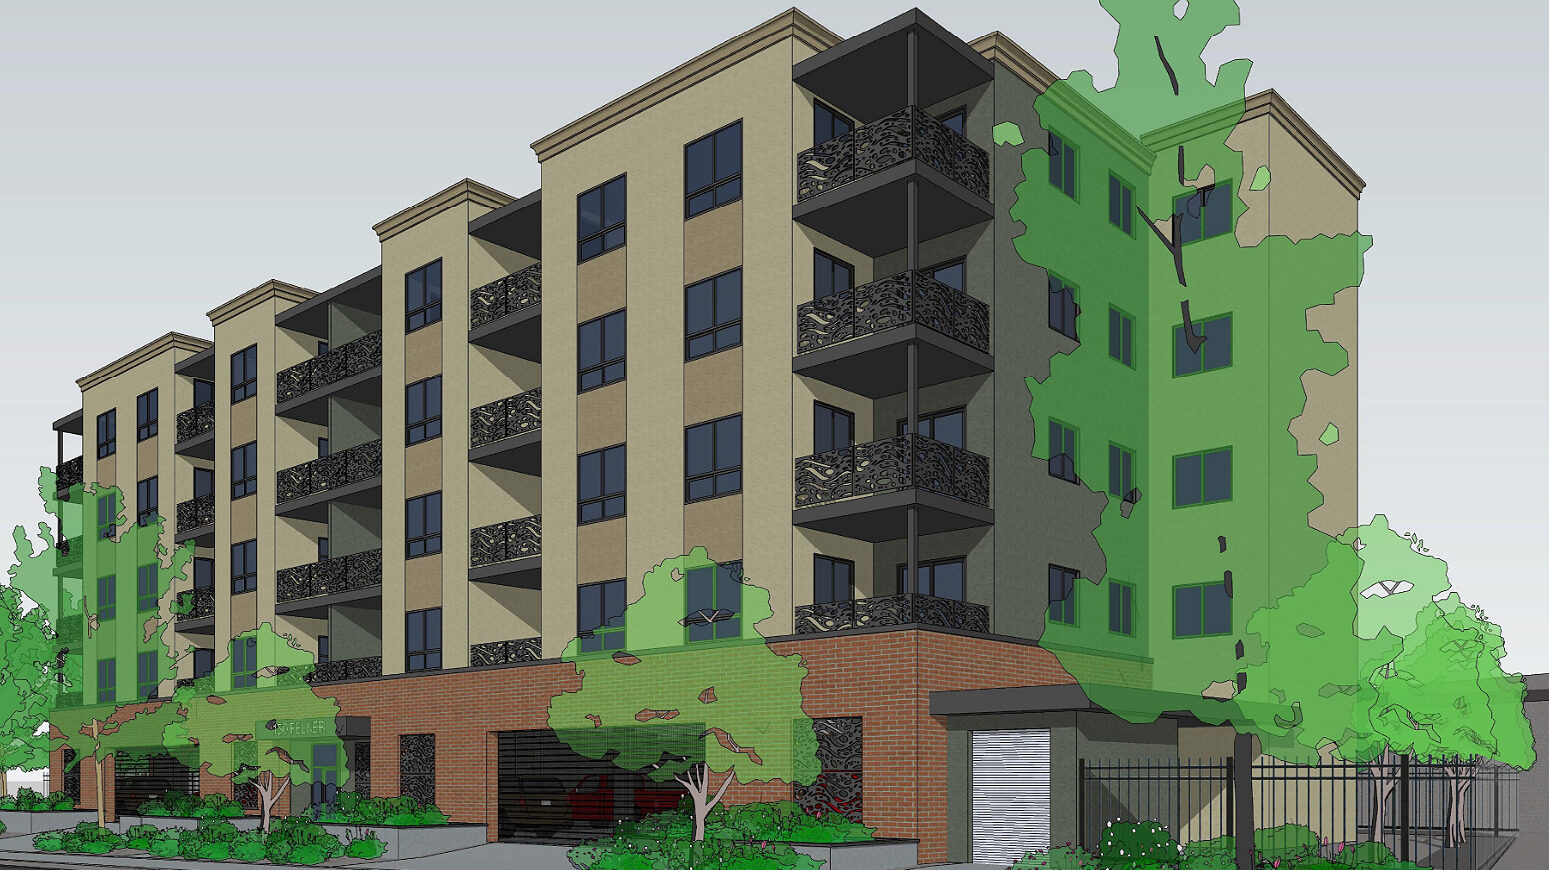 A rendering showing the proposed apartment complex on Felker St. in Santa Cruz.